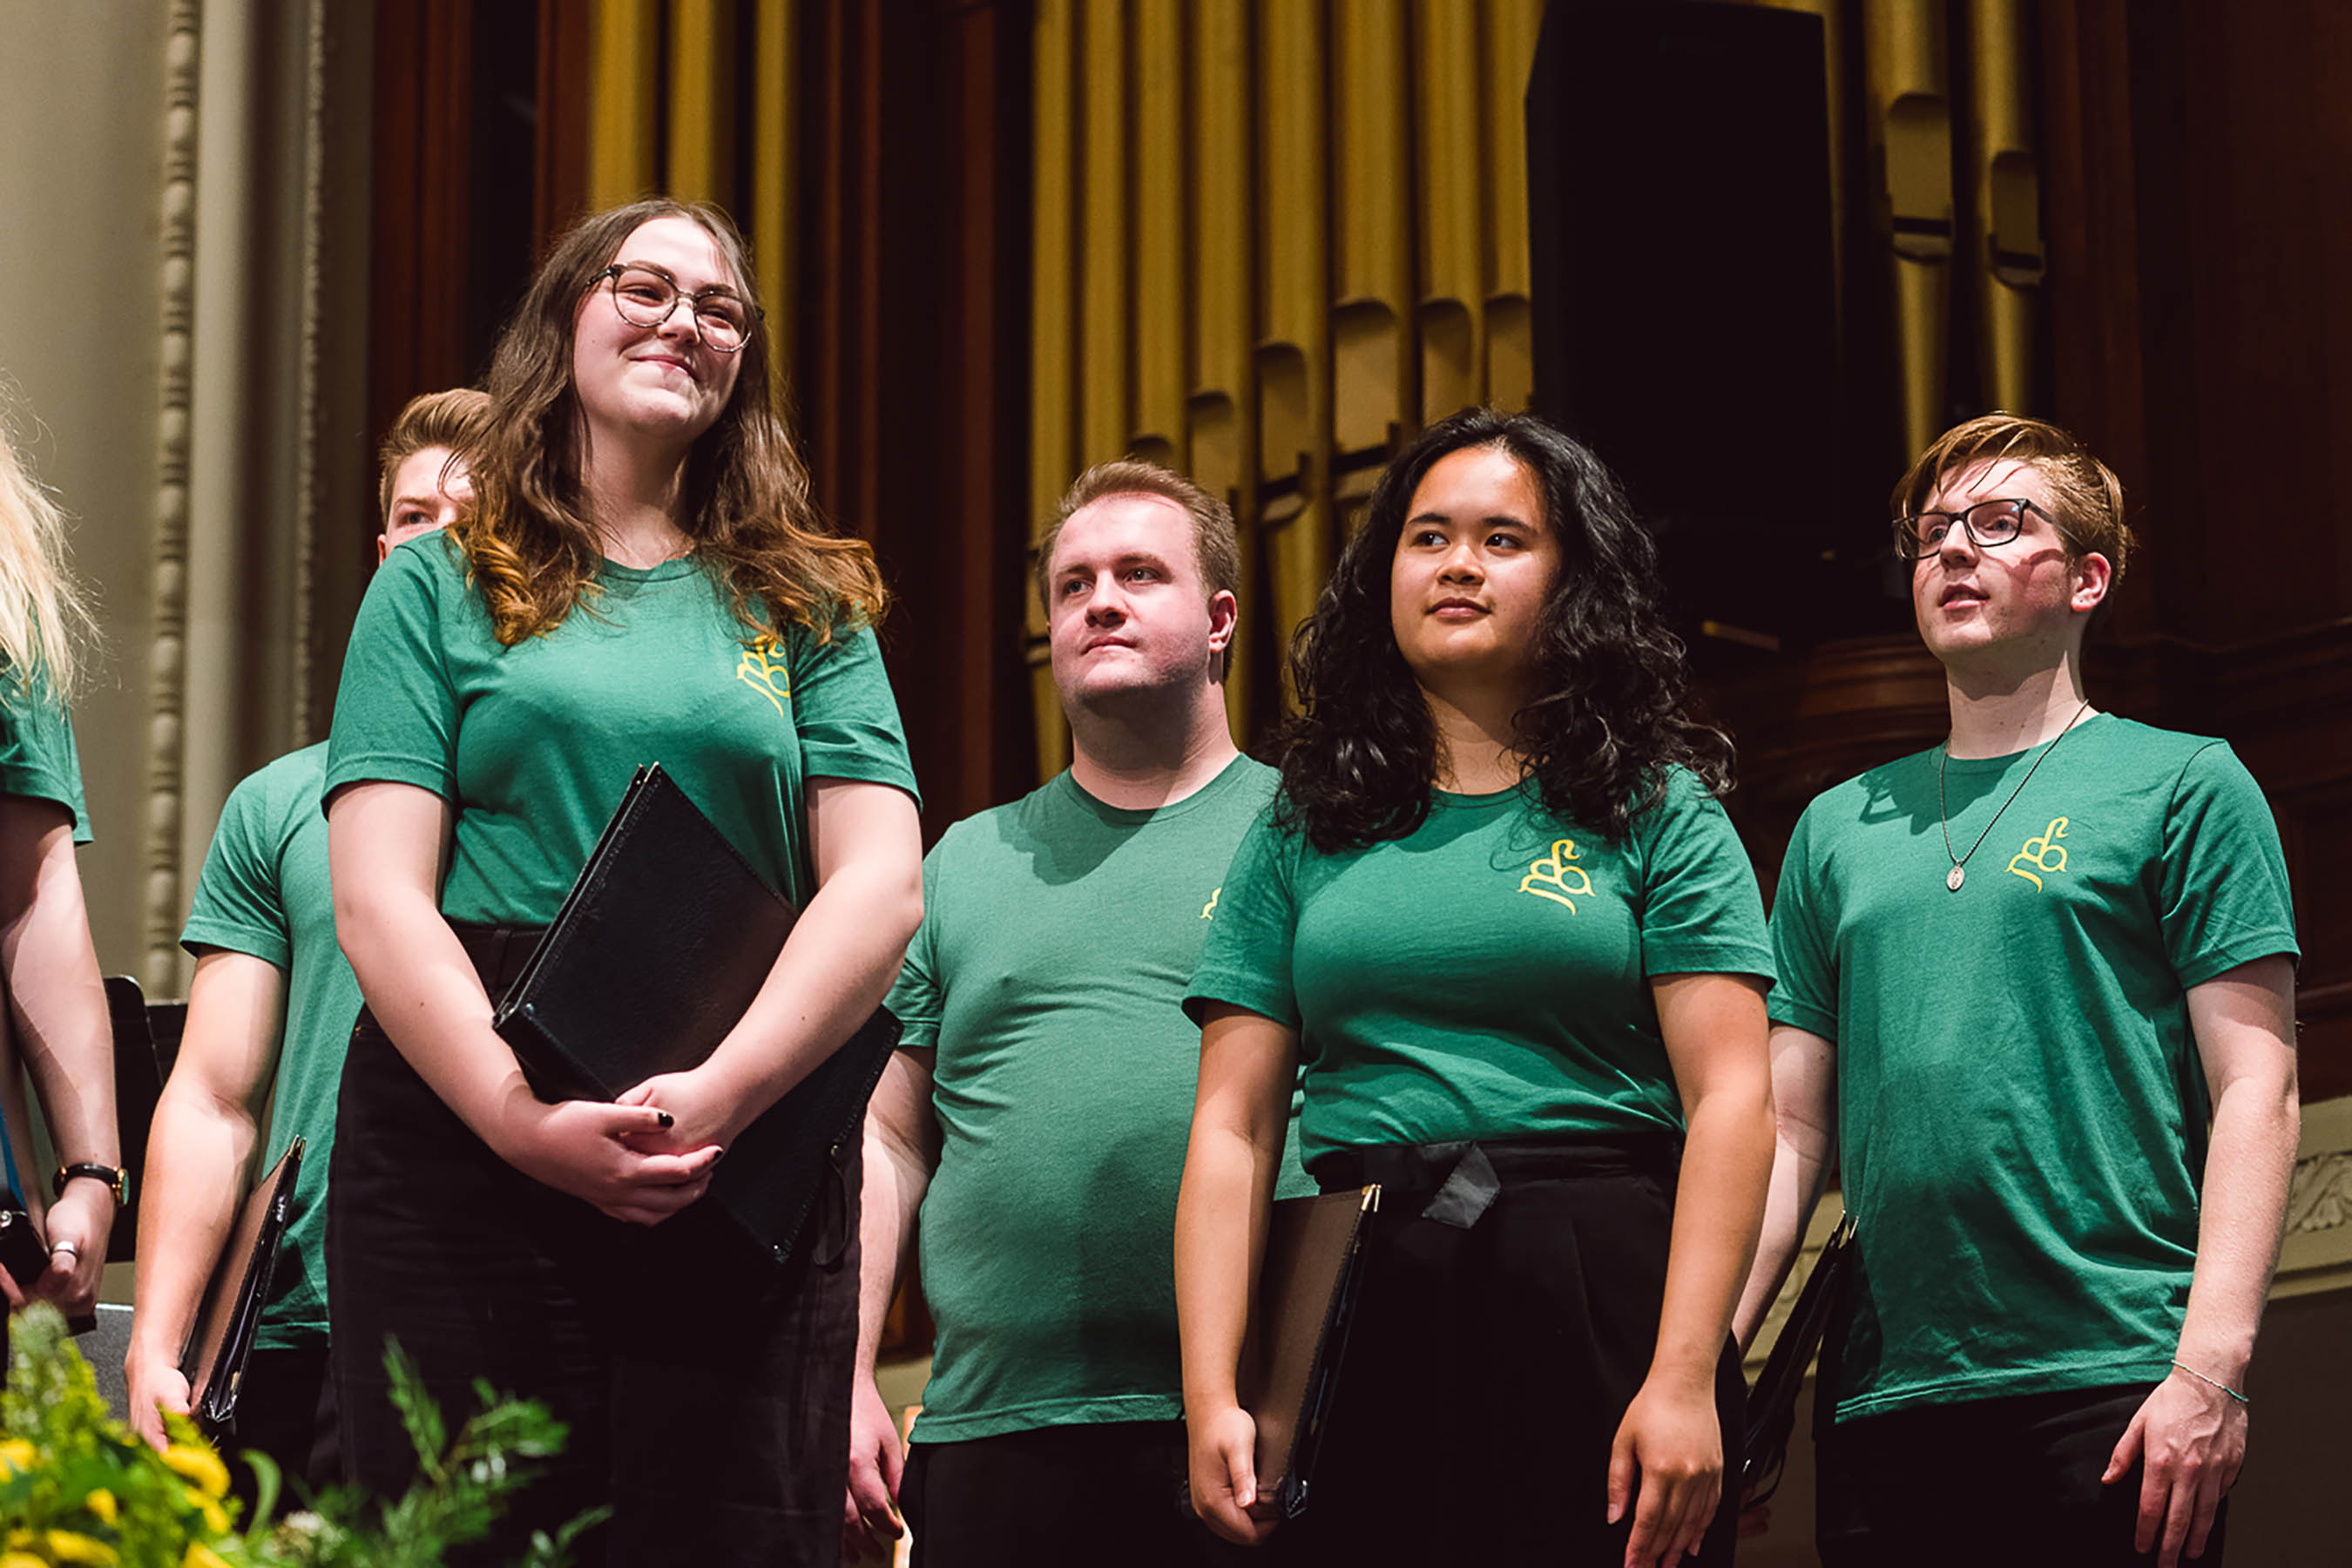 The Madrigal Singers perform at Convocation Hall